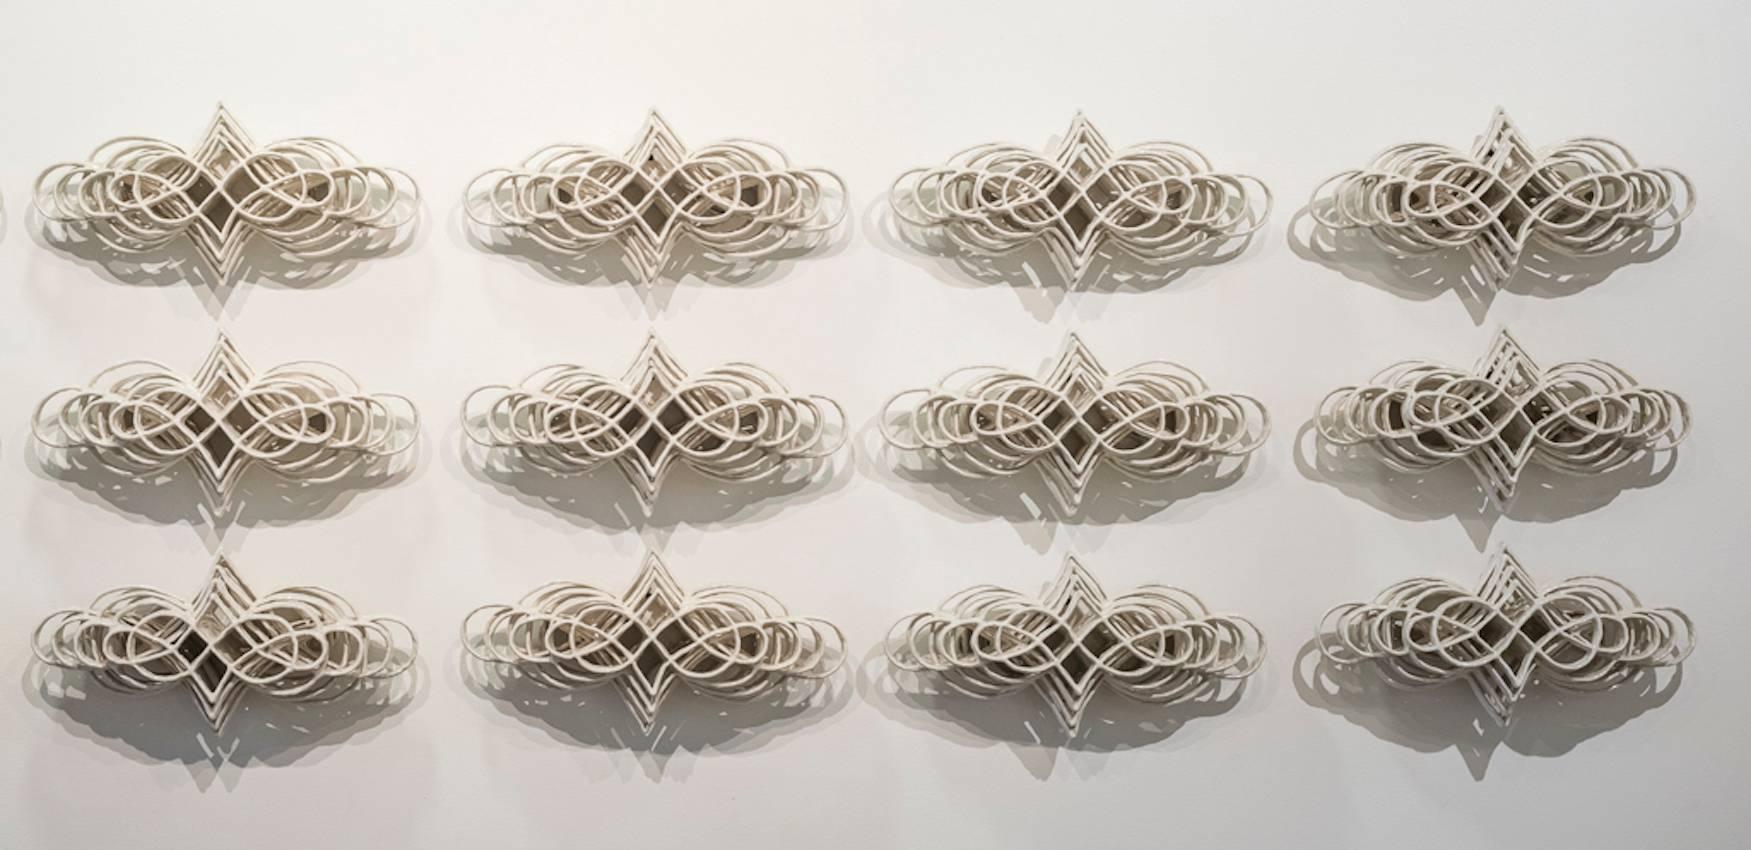 Joanna Poag Flourish Ceramic Wall Sculptures, 2015 In Excellent Condition For Sale In New York, NY